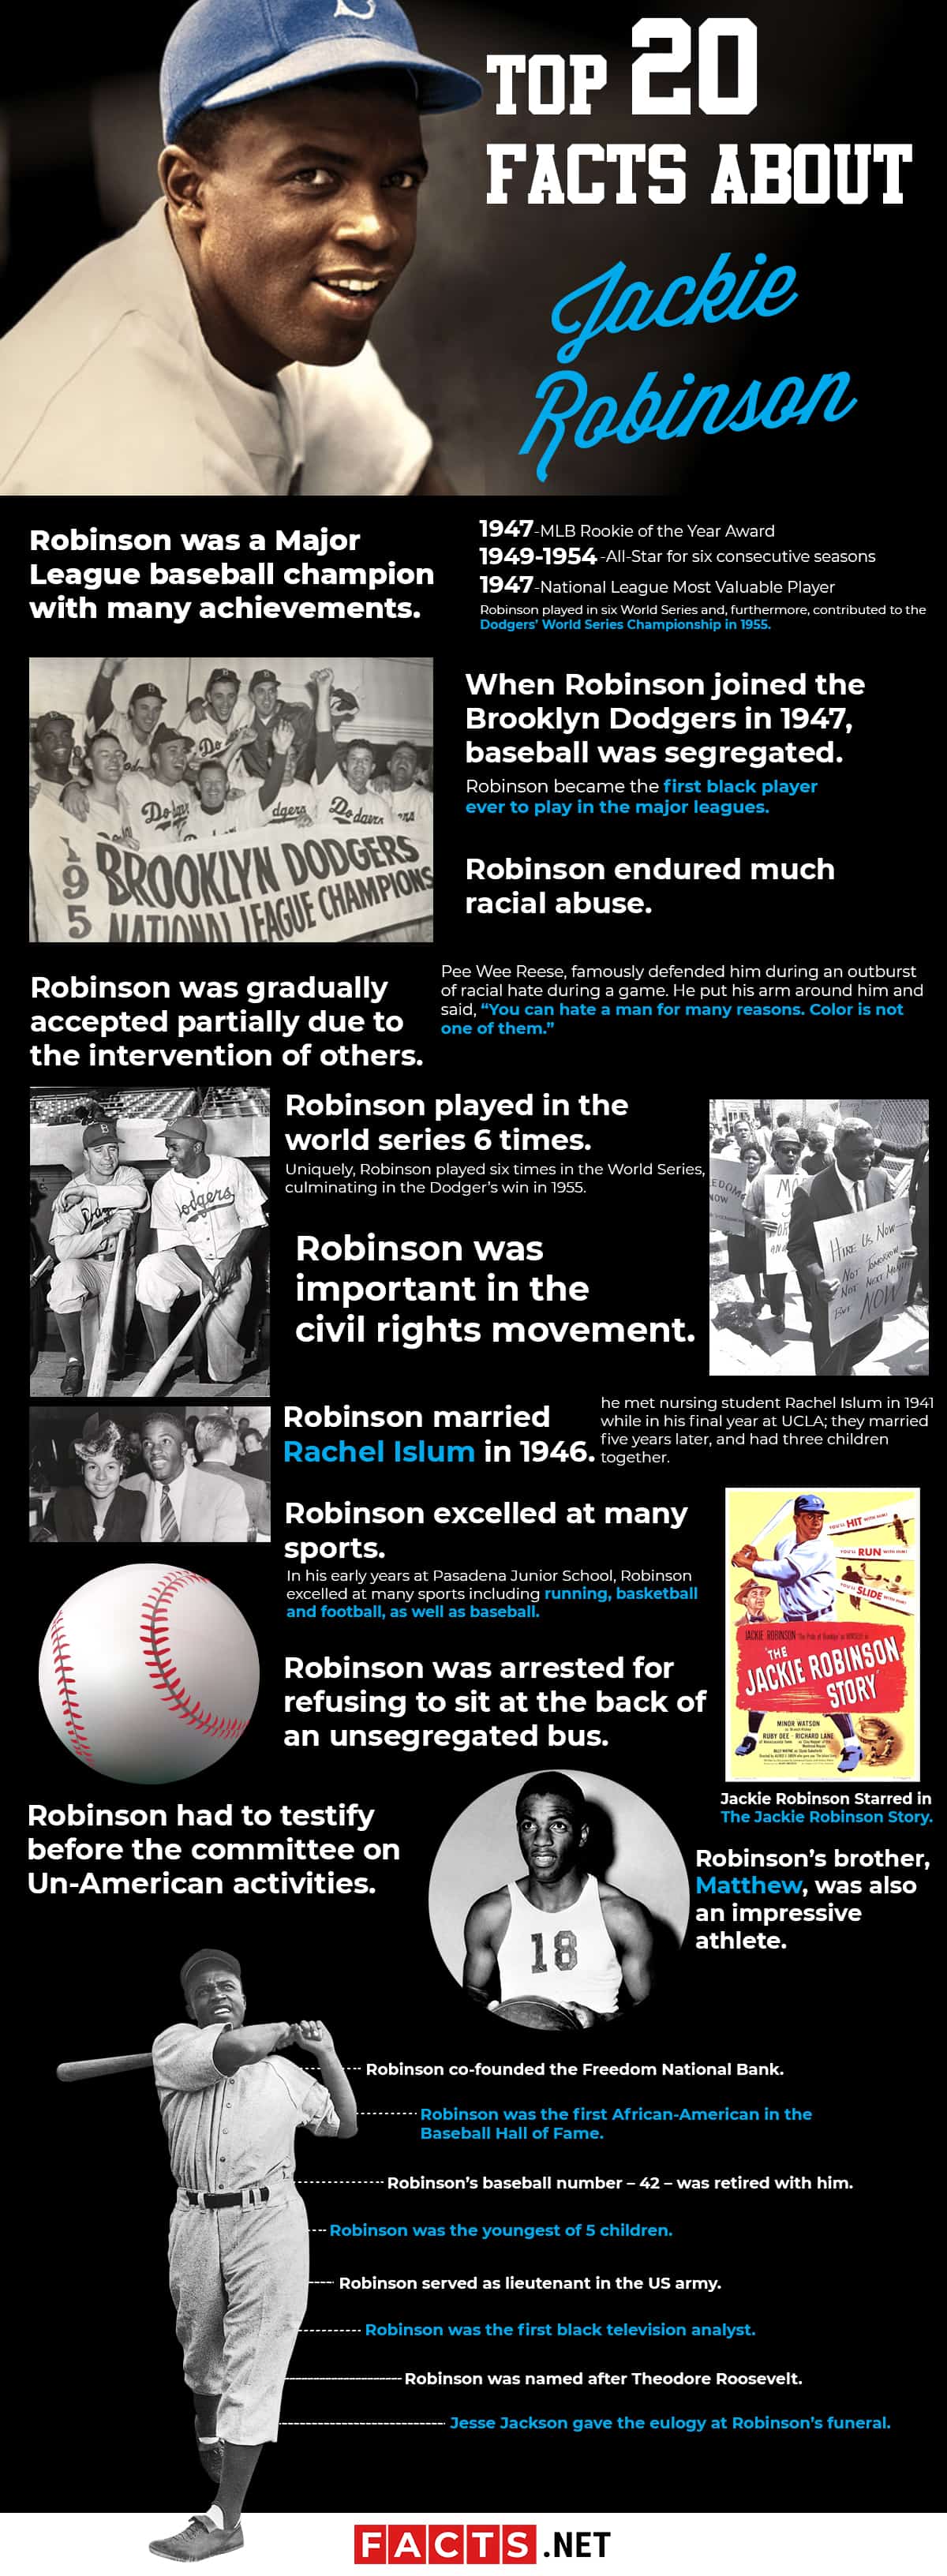 Top 20 Jackie Robinson Facts - Family, Sports, Legacy & More 